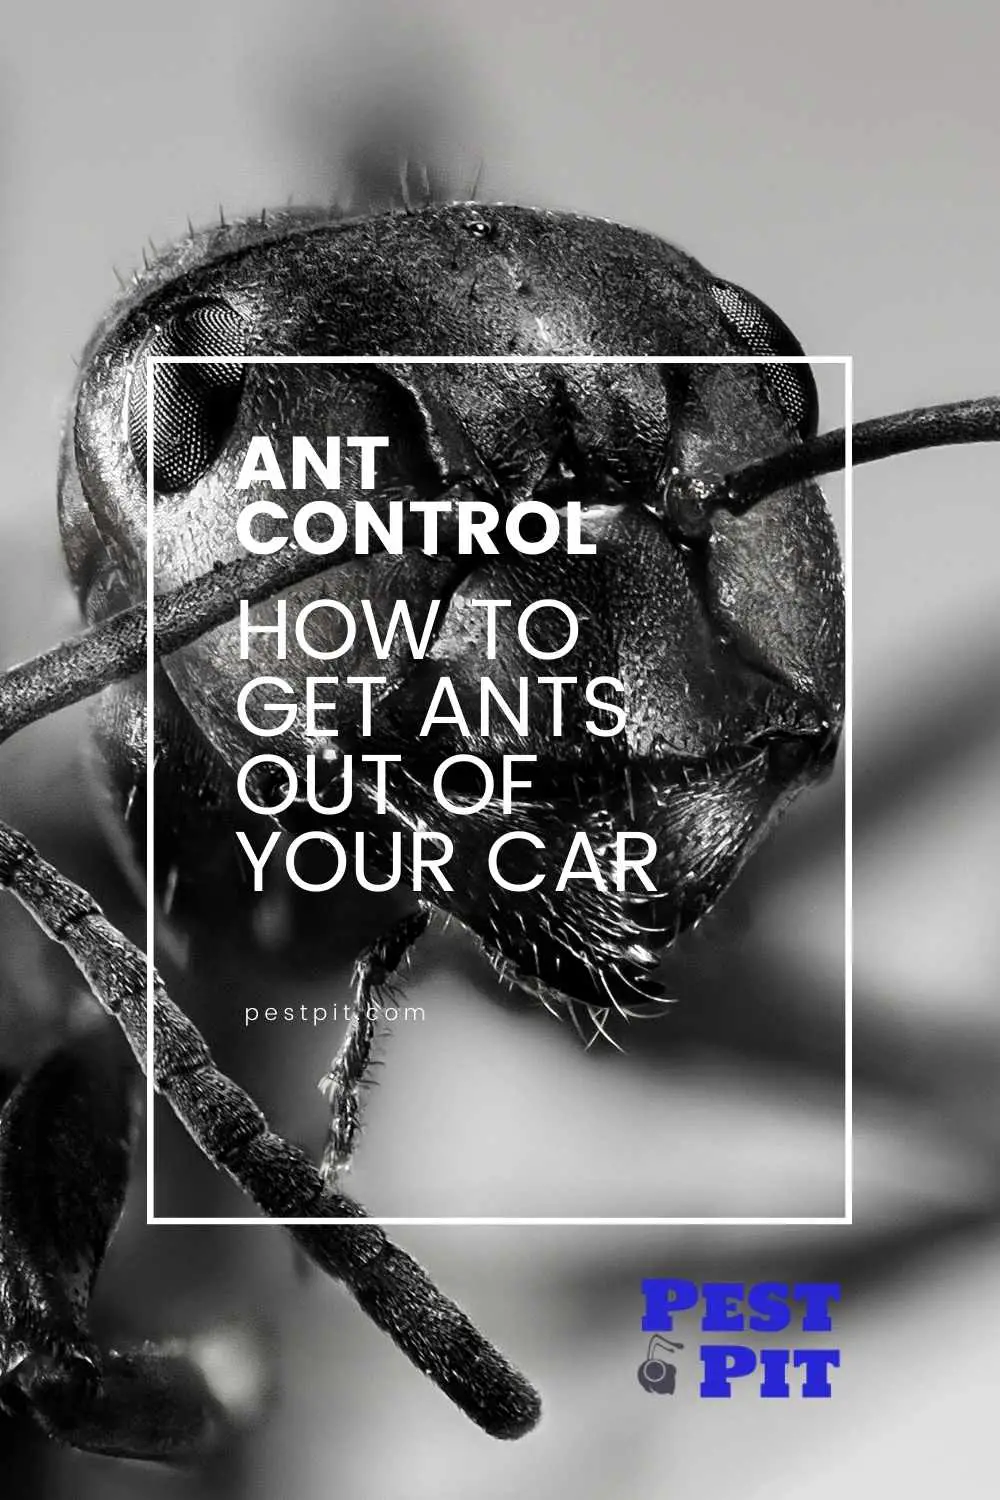 How to Get Ants Out of Your Car